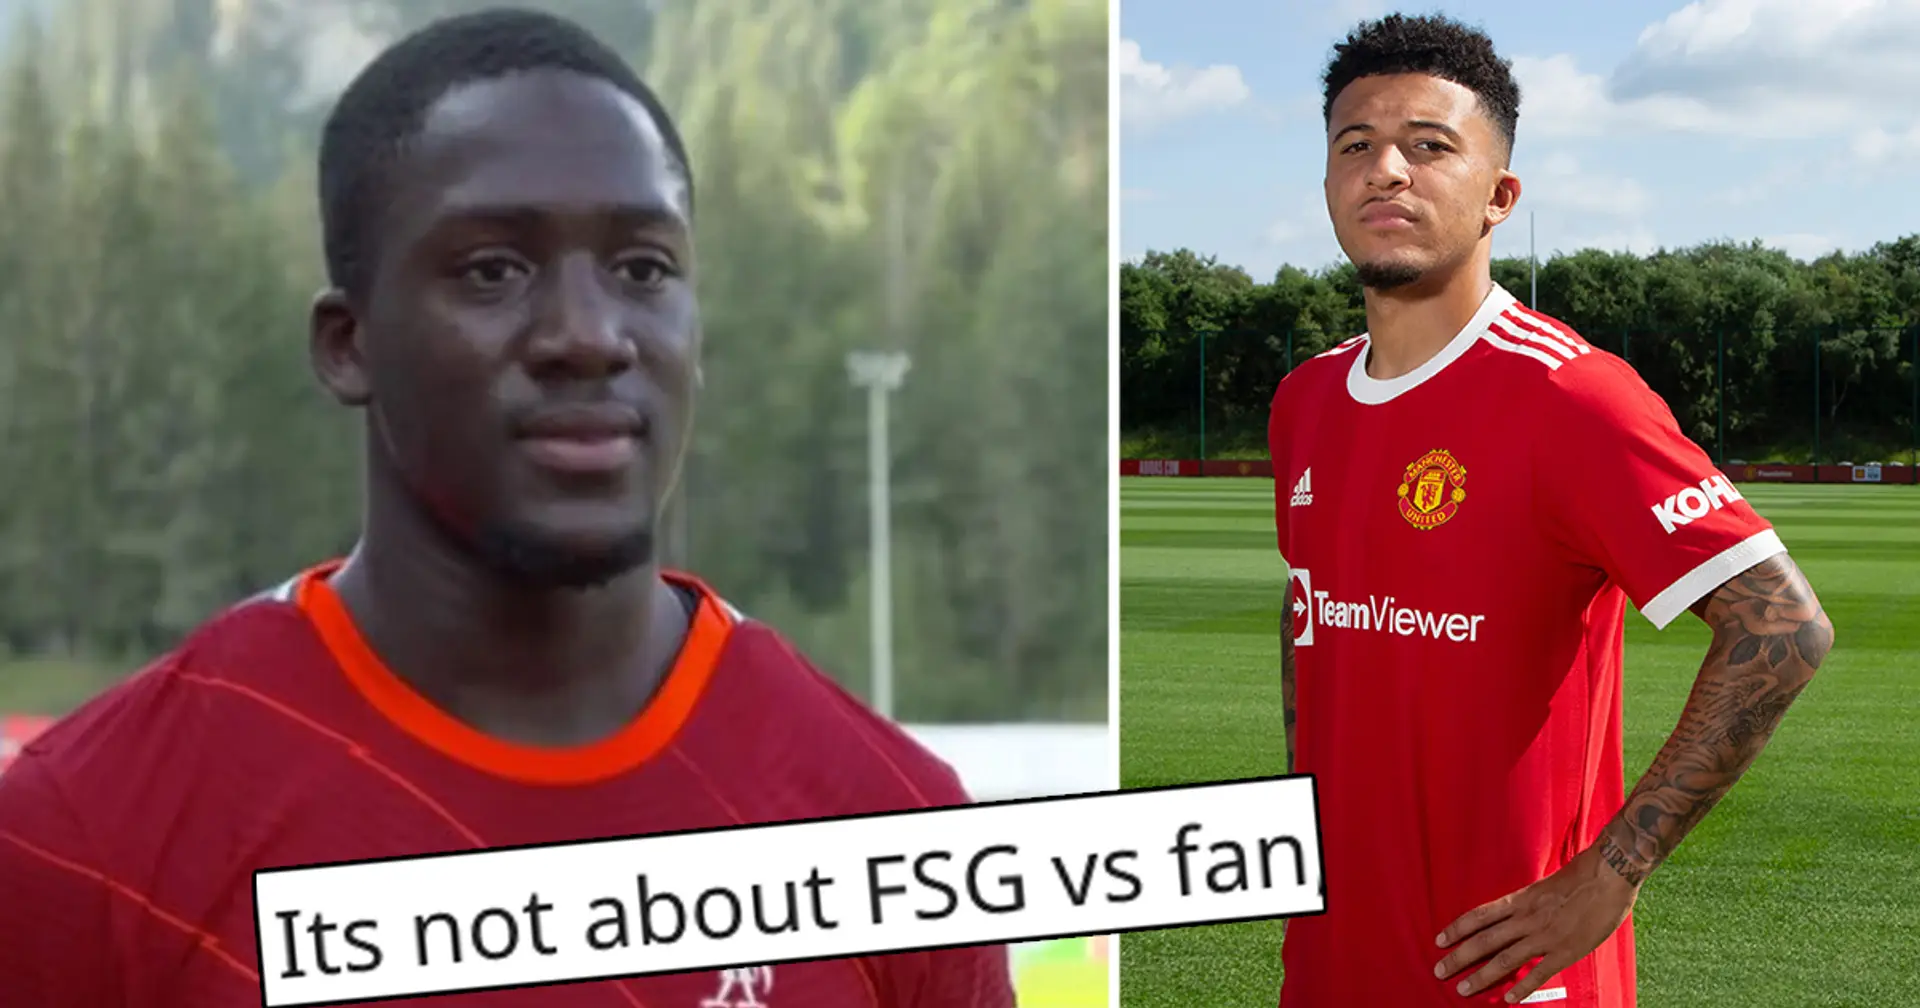 'The name doesn't win you the game': Fan explains why Liverpool's transfer inactivity is a myth, mentions United